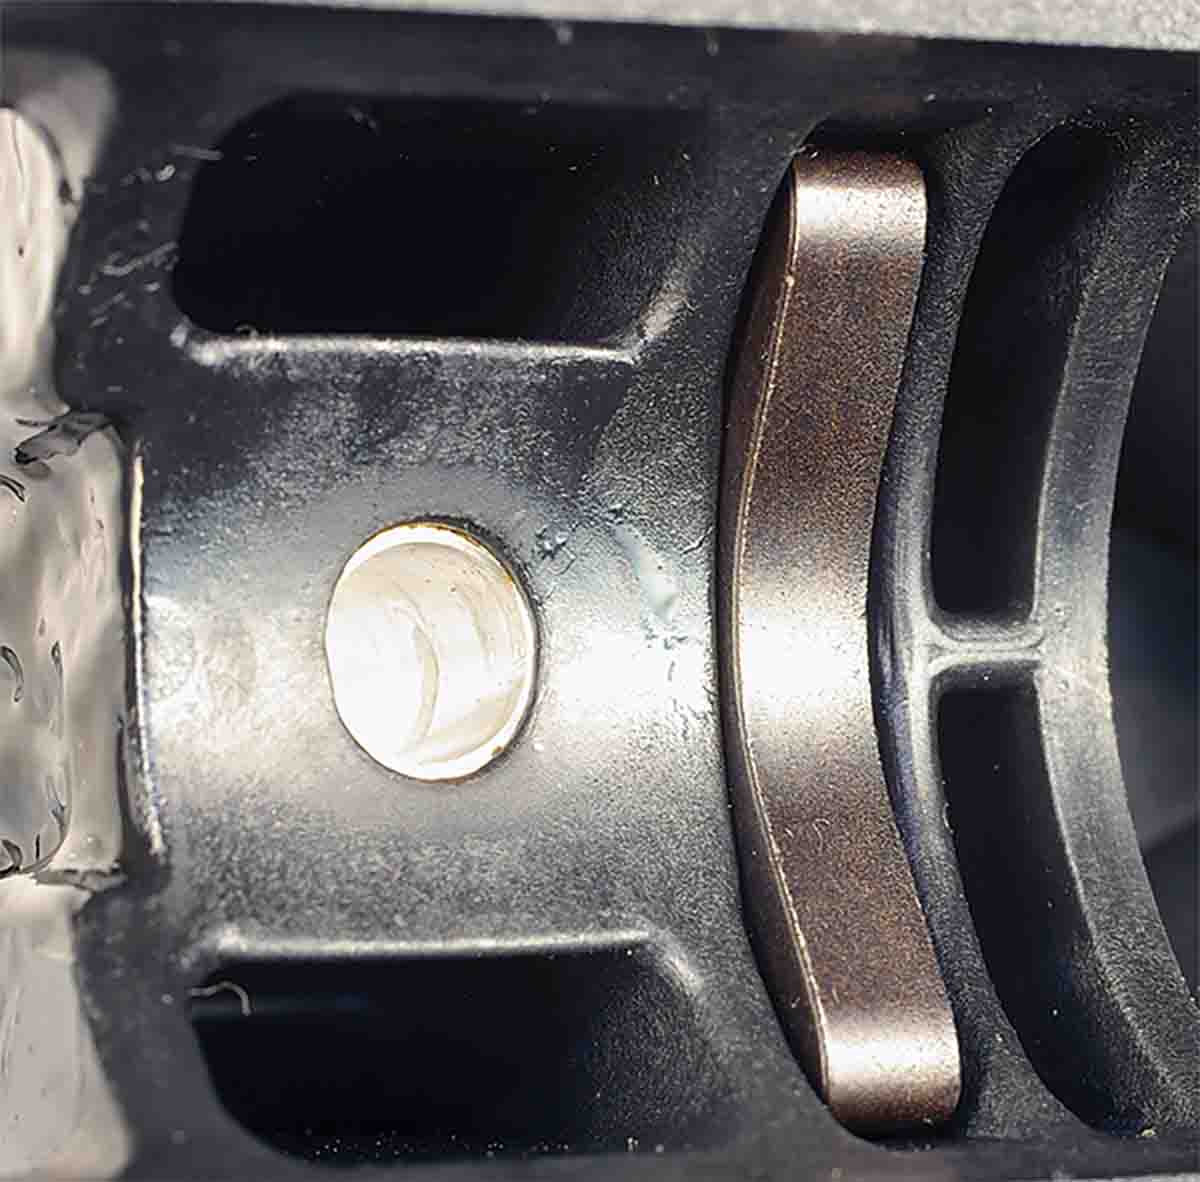 The recoil lug is anchored in the stock and attaches to a cut in the bottom of the receiver ring.